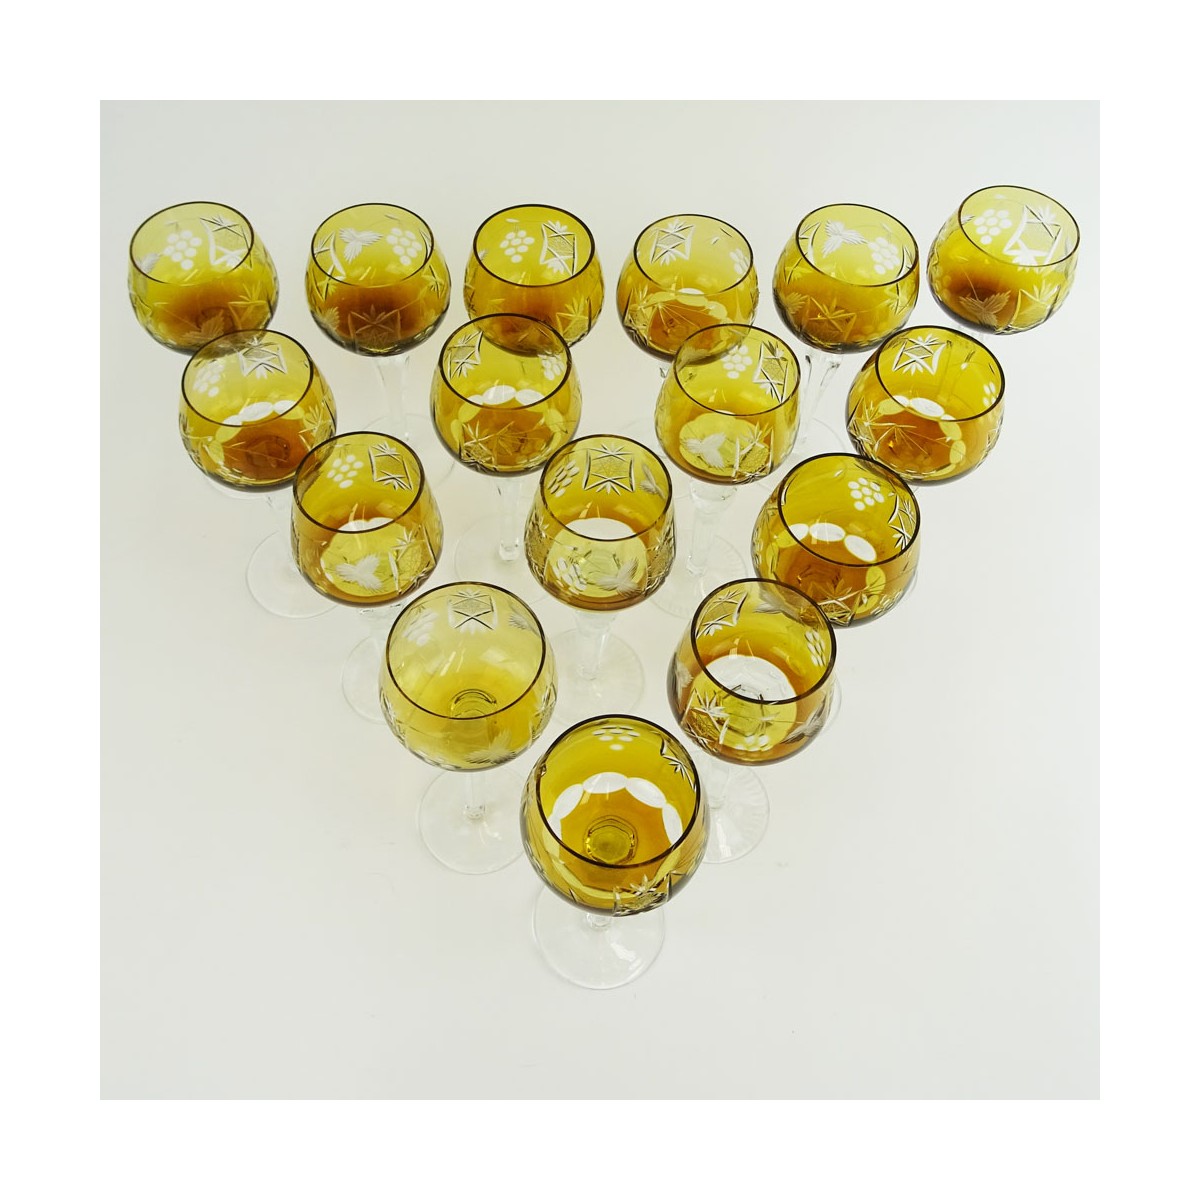 Lot of 16 Bohemian Cut Glass Wine Hocks in Amber. Various stems. Measures 8" to 8-1/4". Very good c